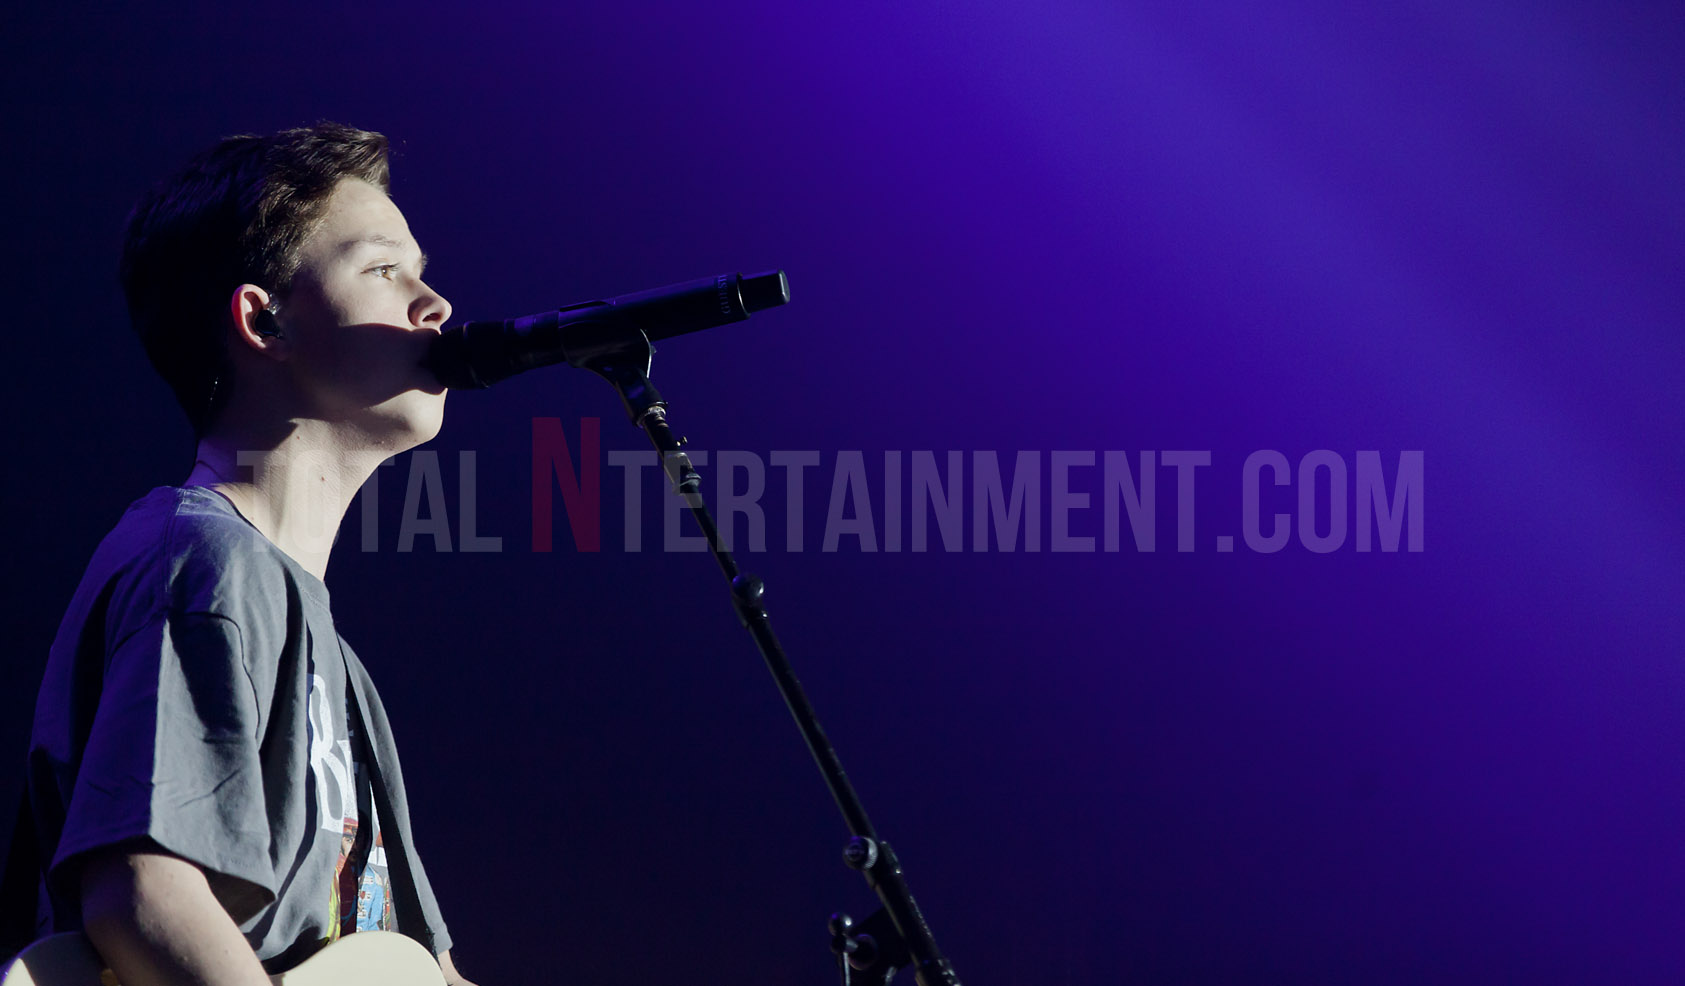 Jacob Sartorius, The Vamps, Sheffield, Support, Special guest, Jo Forrest, totalntertainment